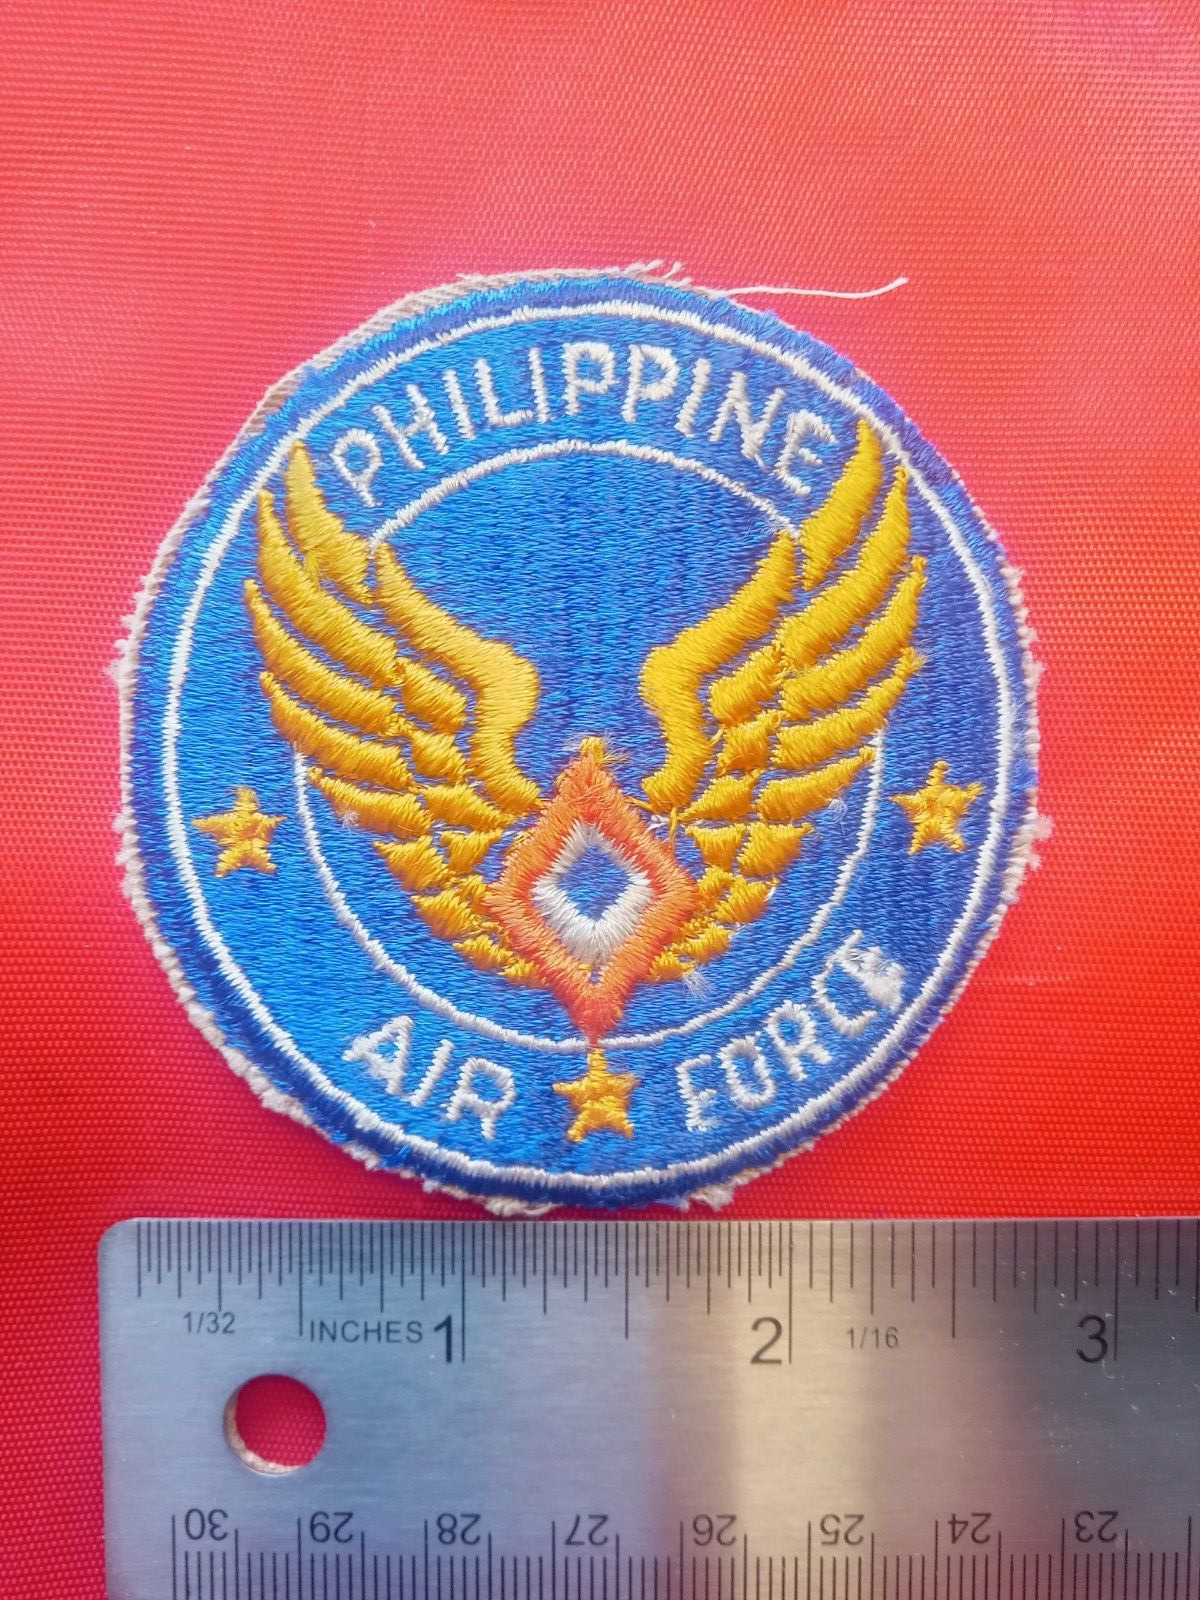 Authentic WW2 Era Philippine Air Force Military Patch